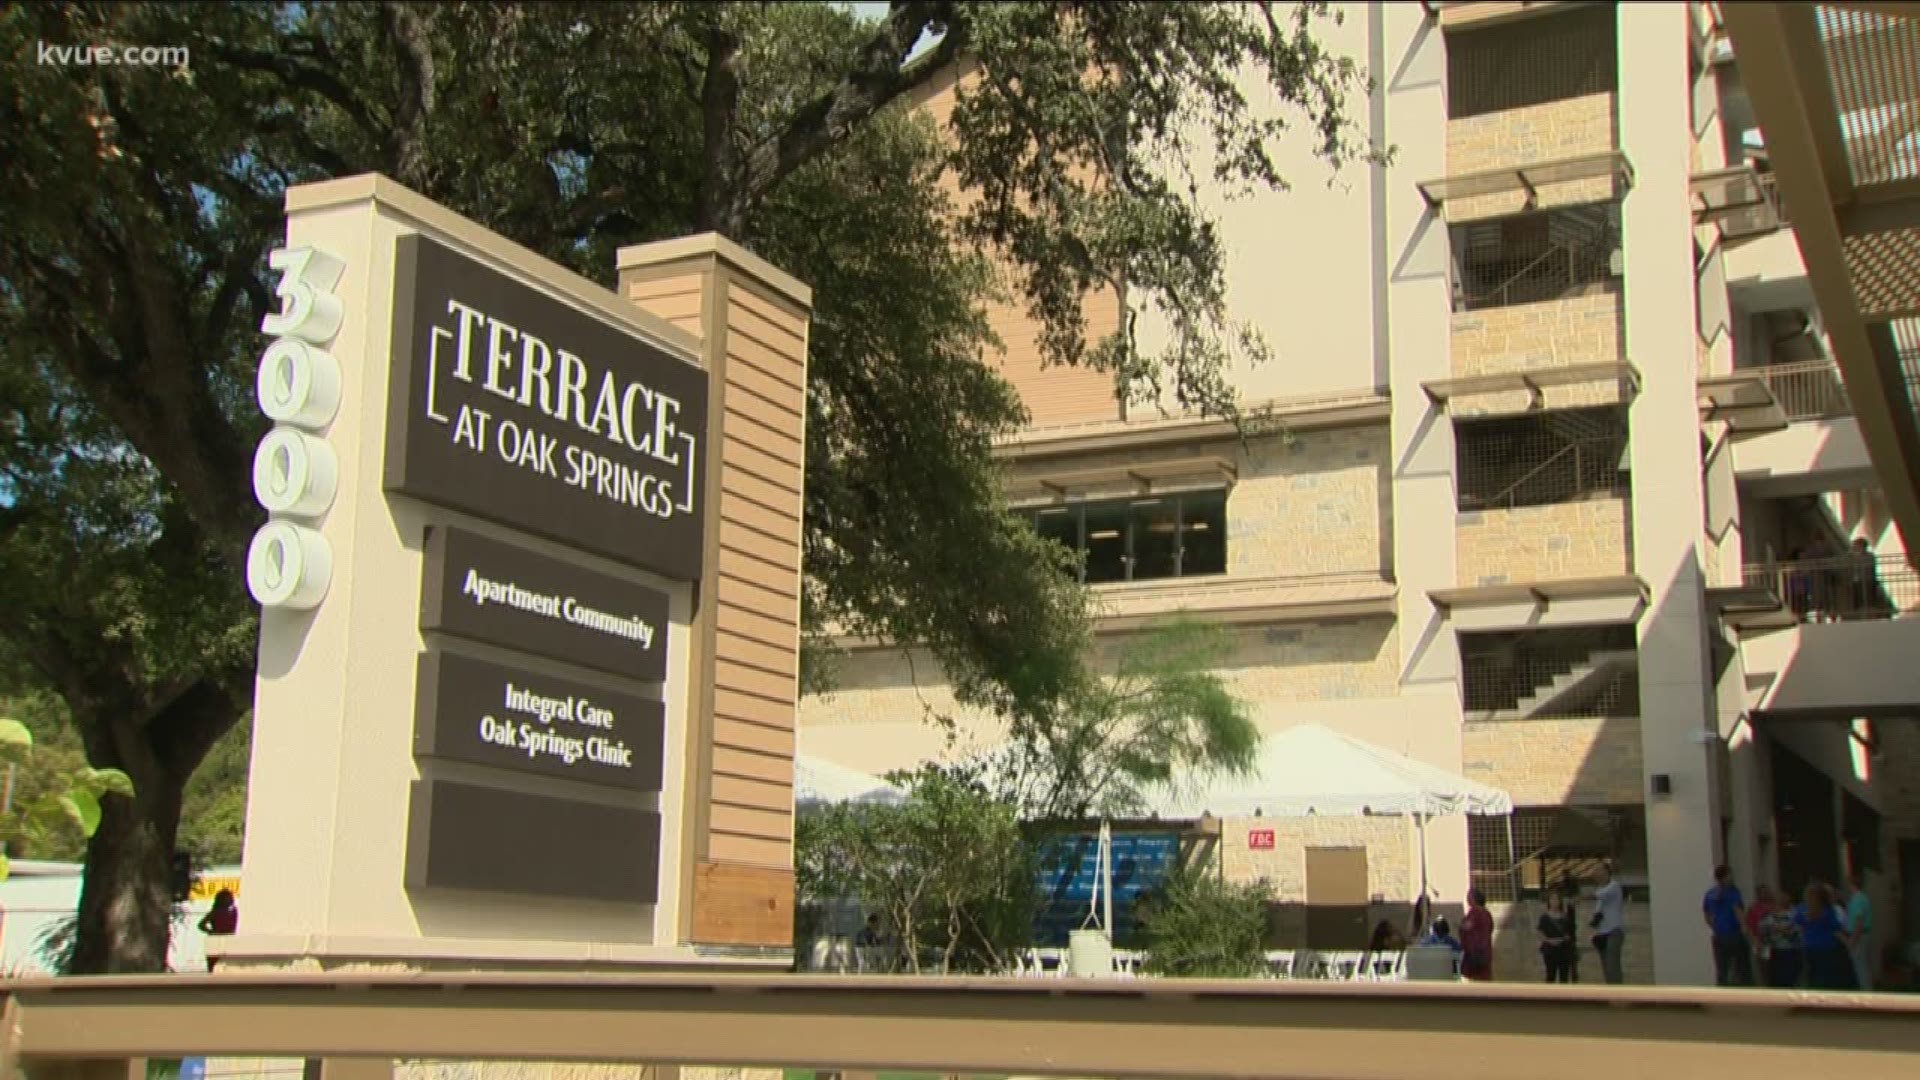 The Terrace at Oak Springs apartments in East Austin will house 50 people who are experiencing homelessness.